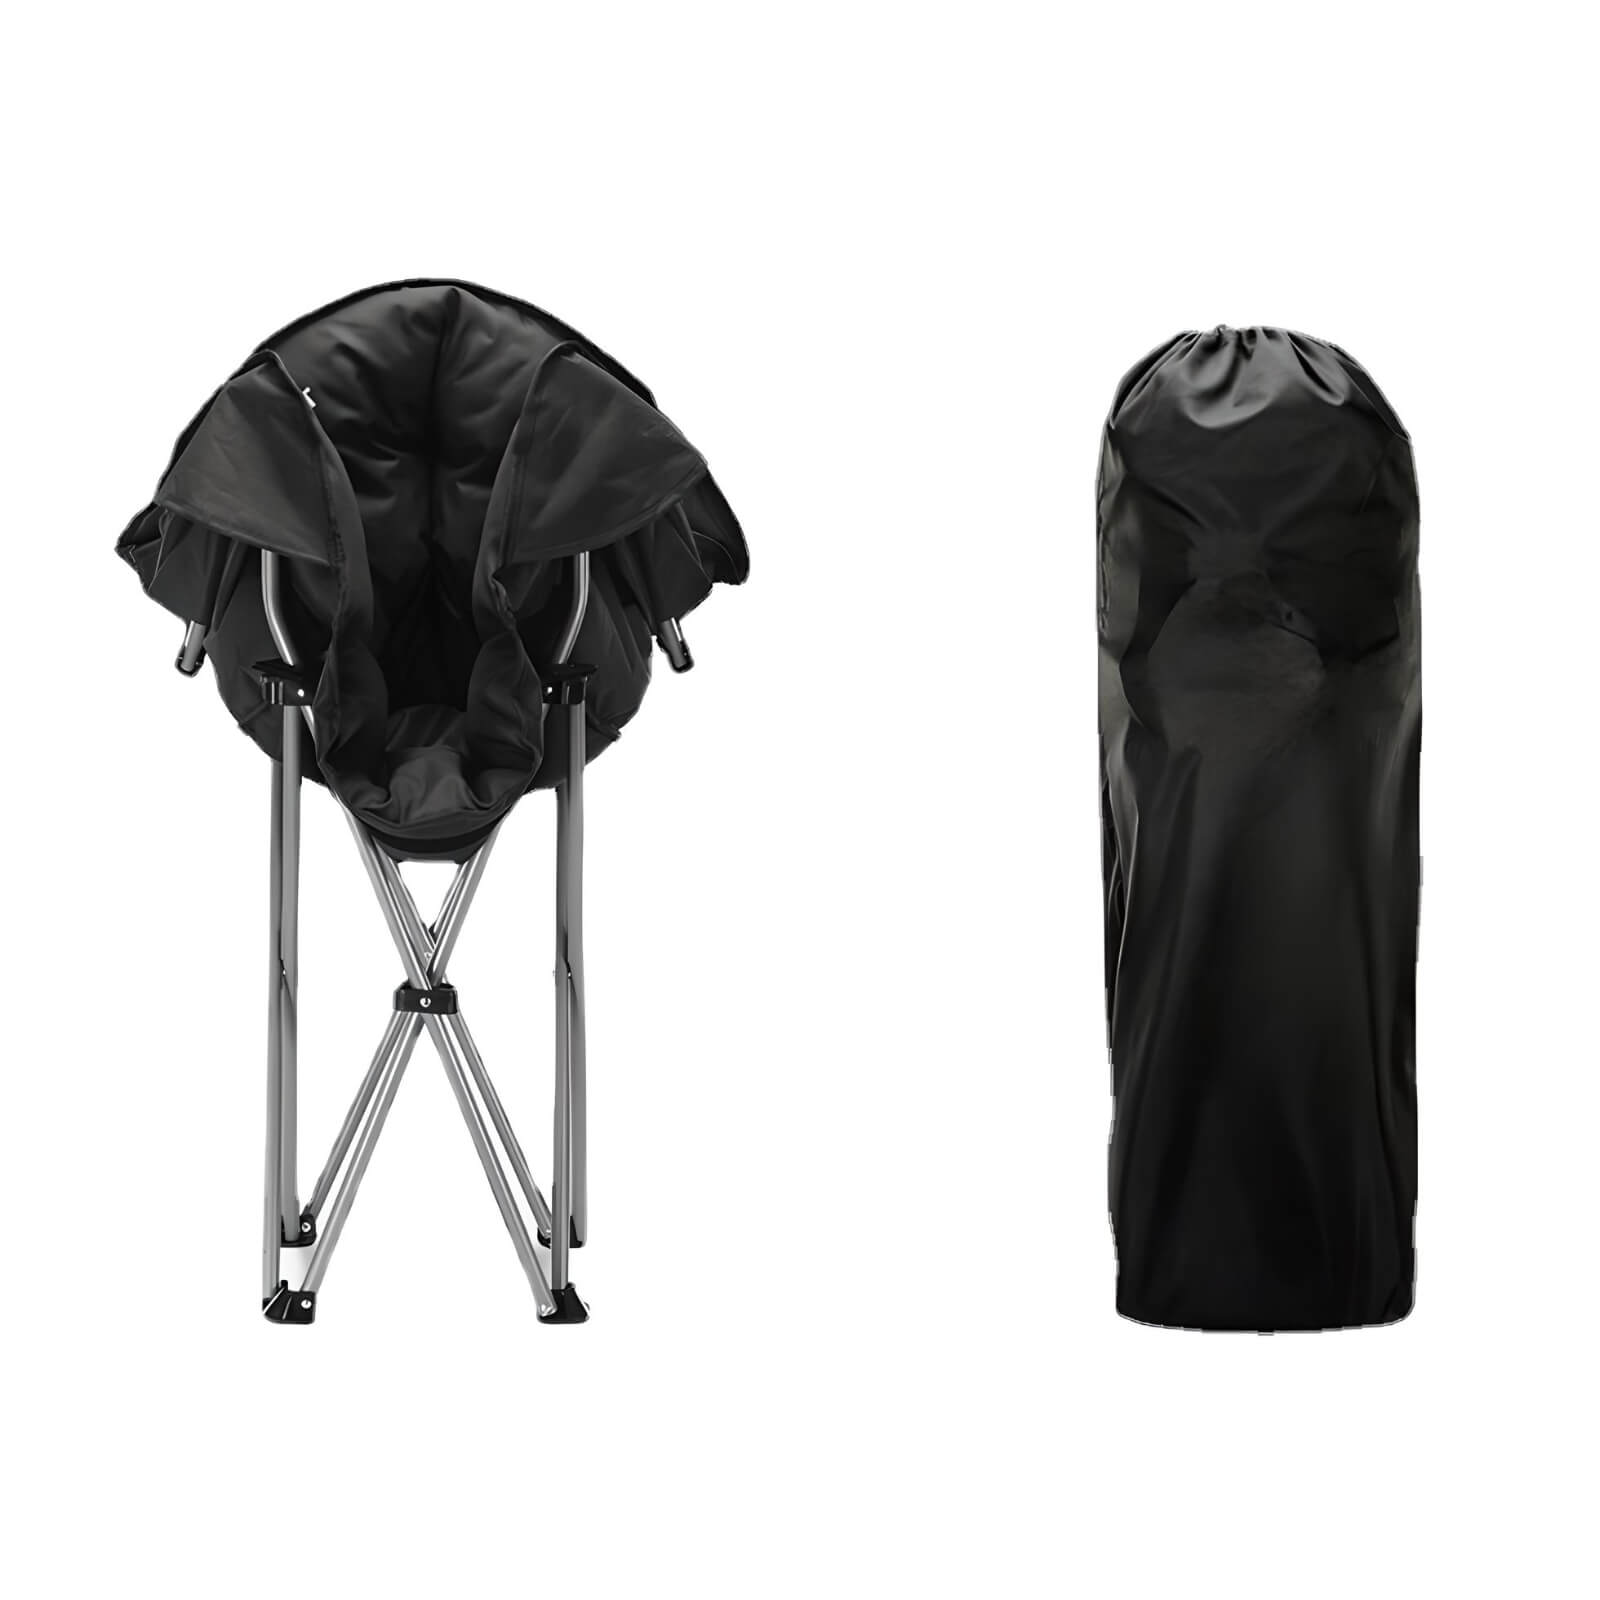 oversize-camping-chair-black-colour